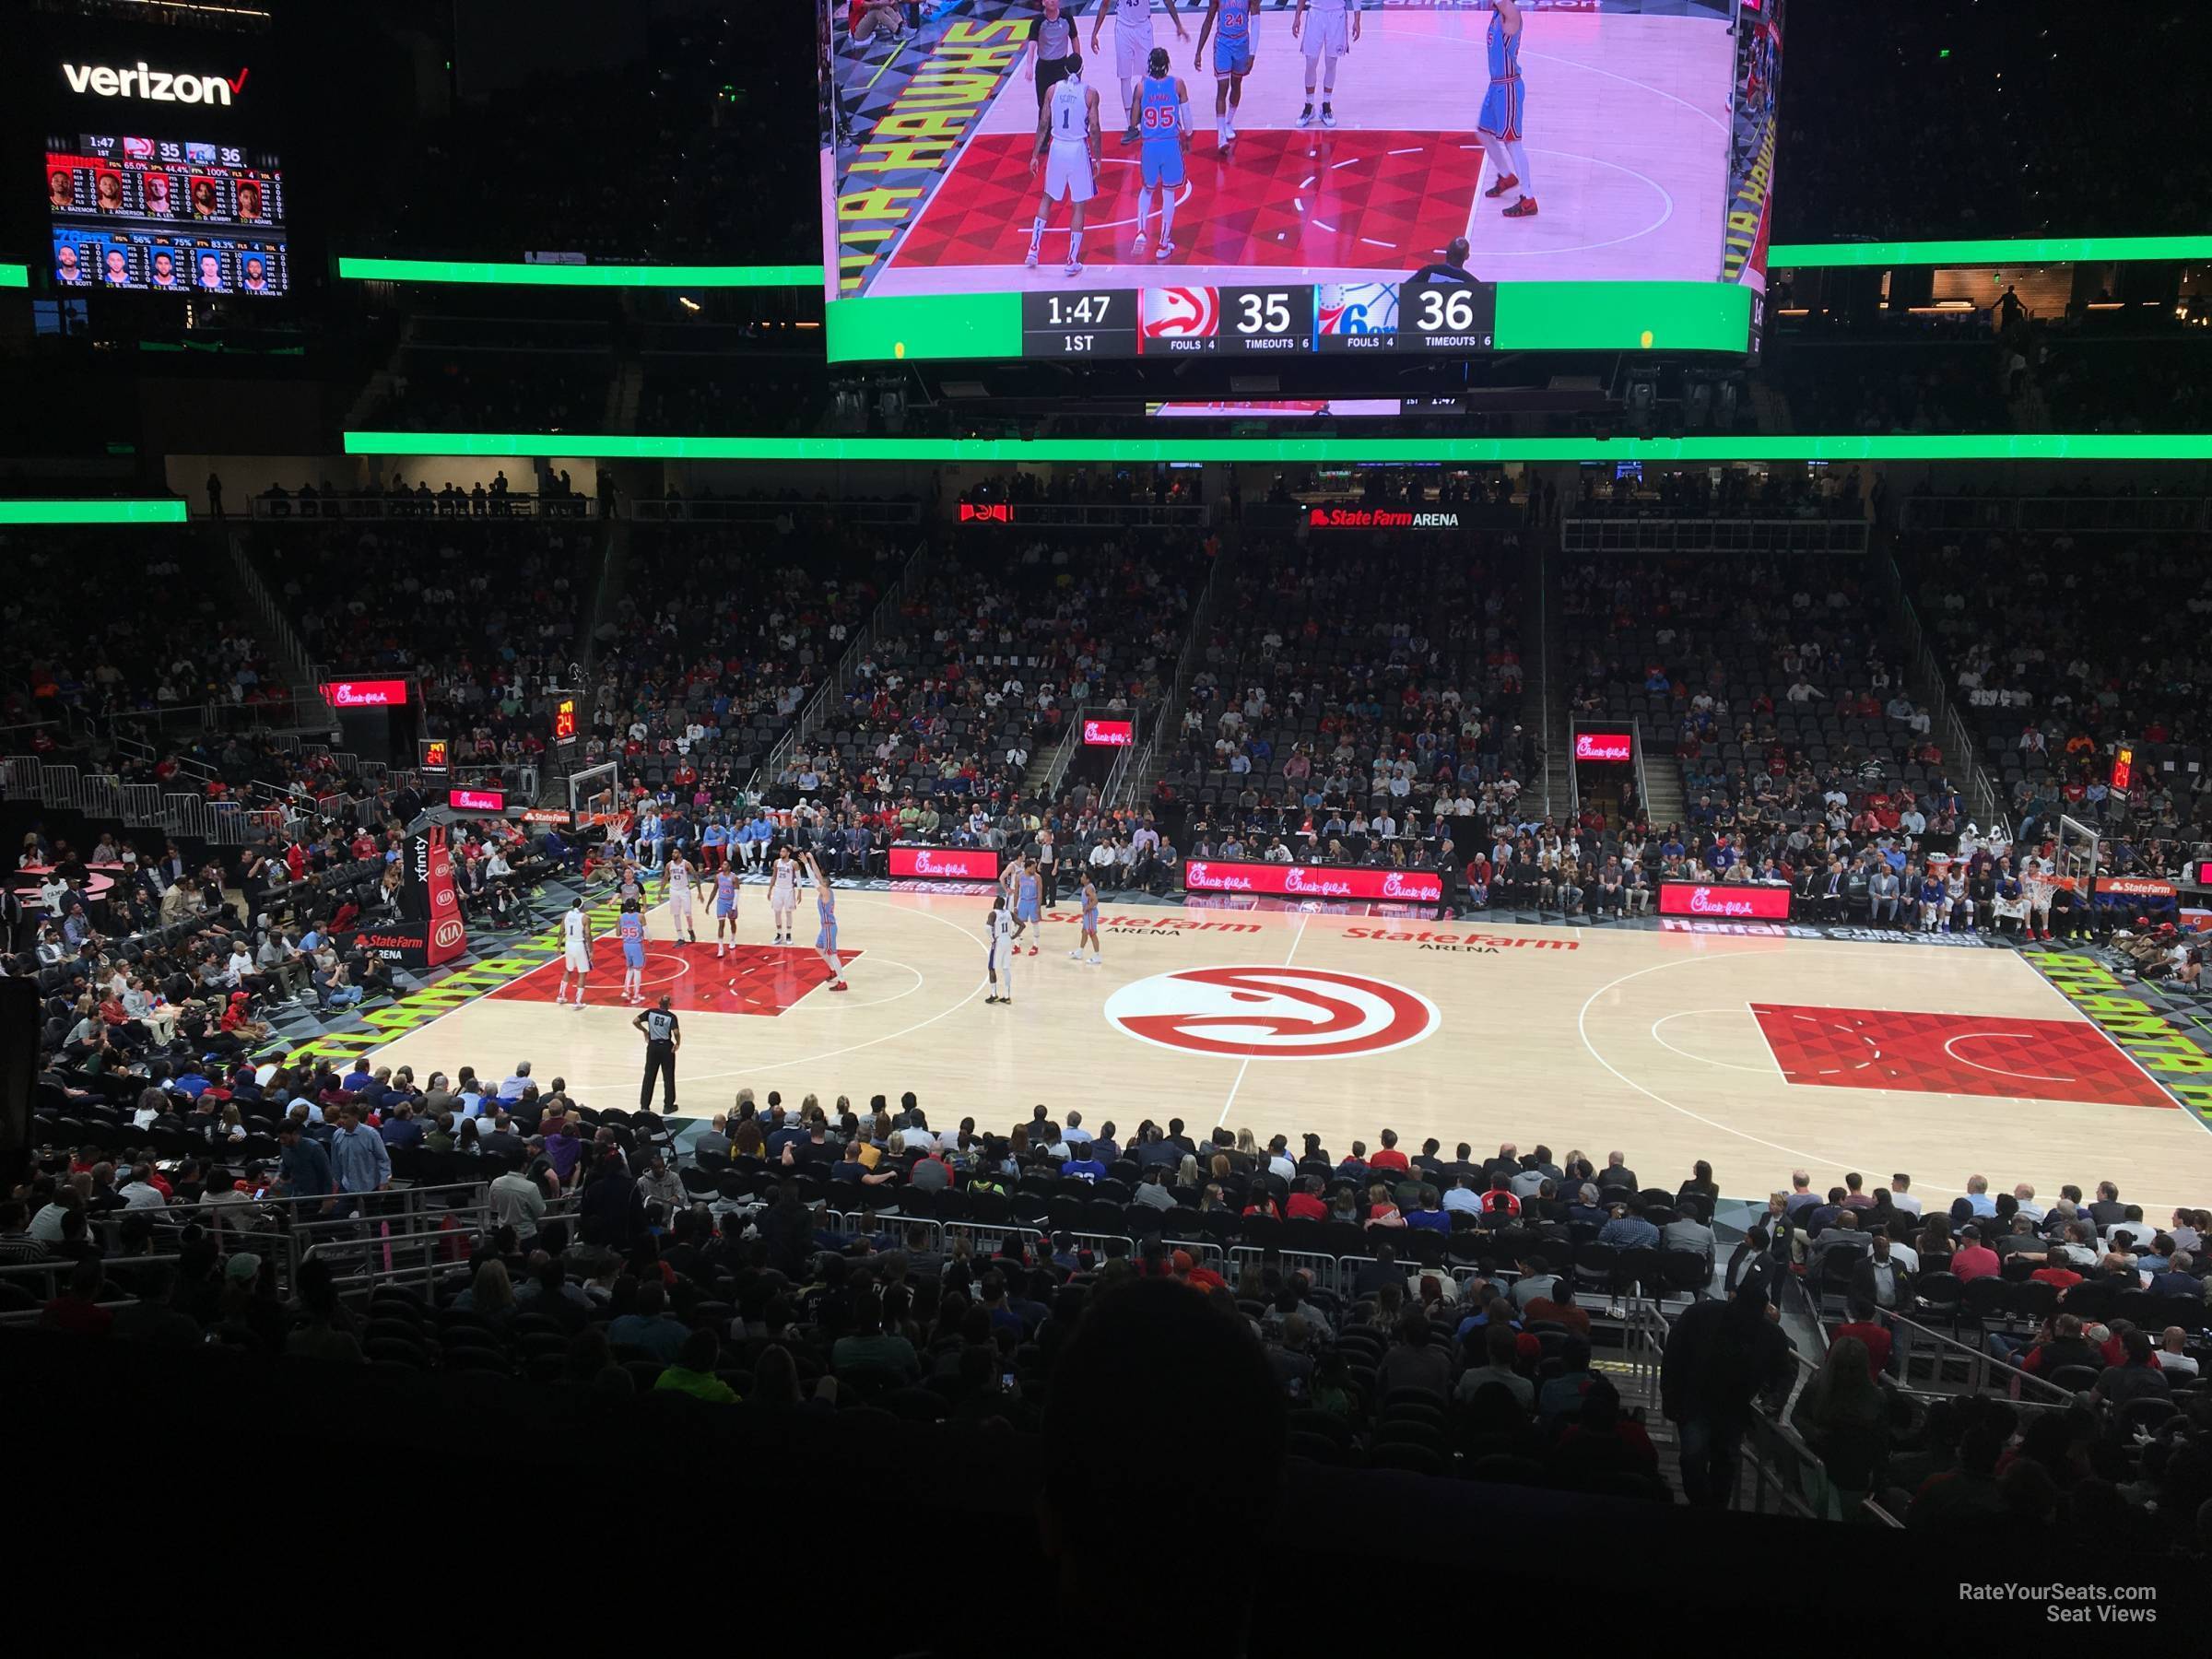 section 108, row ww seat view  for basketball - state farm arena